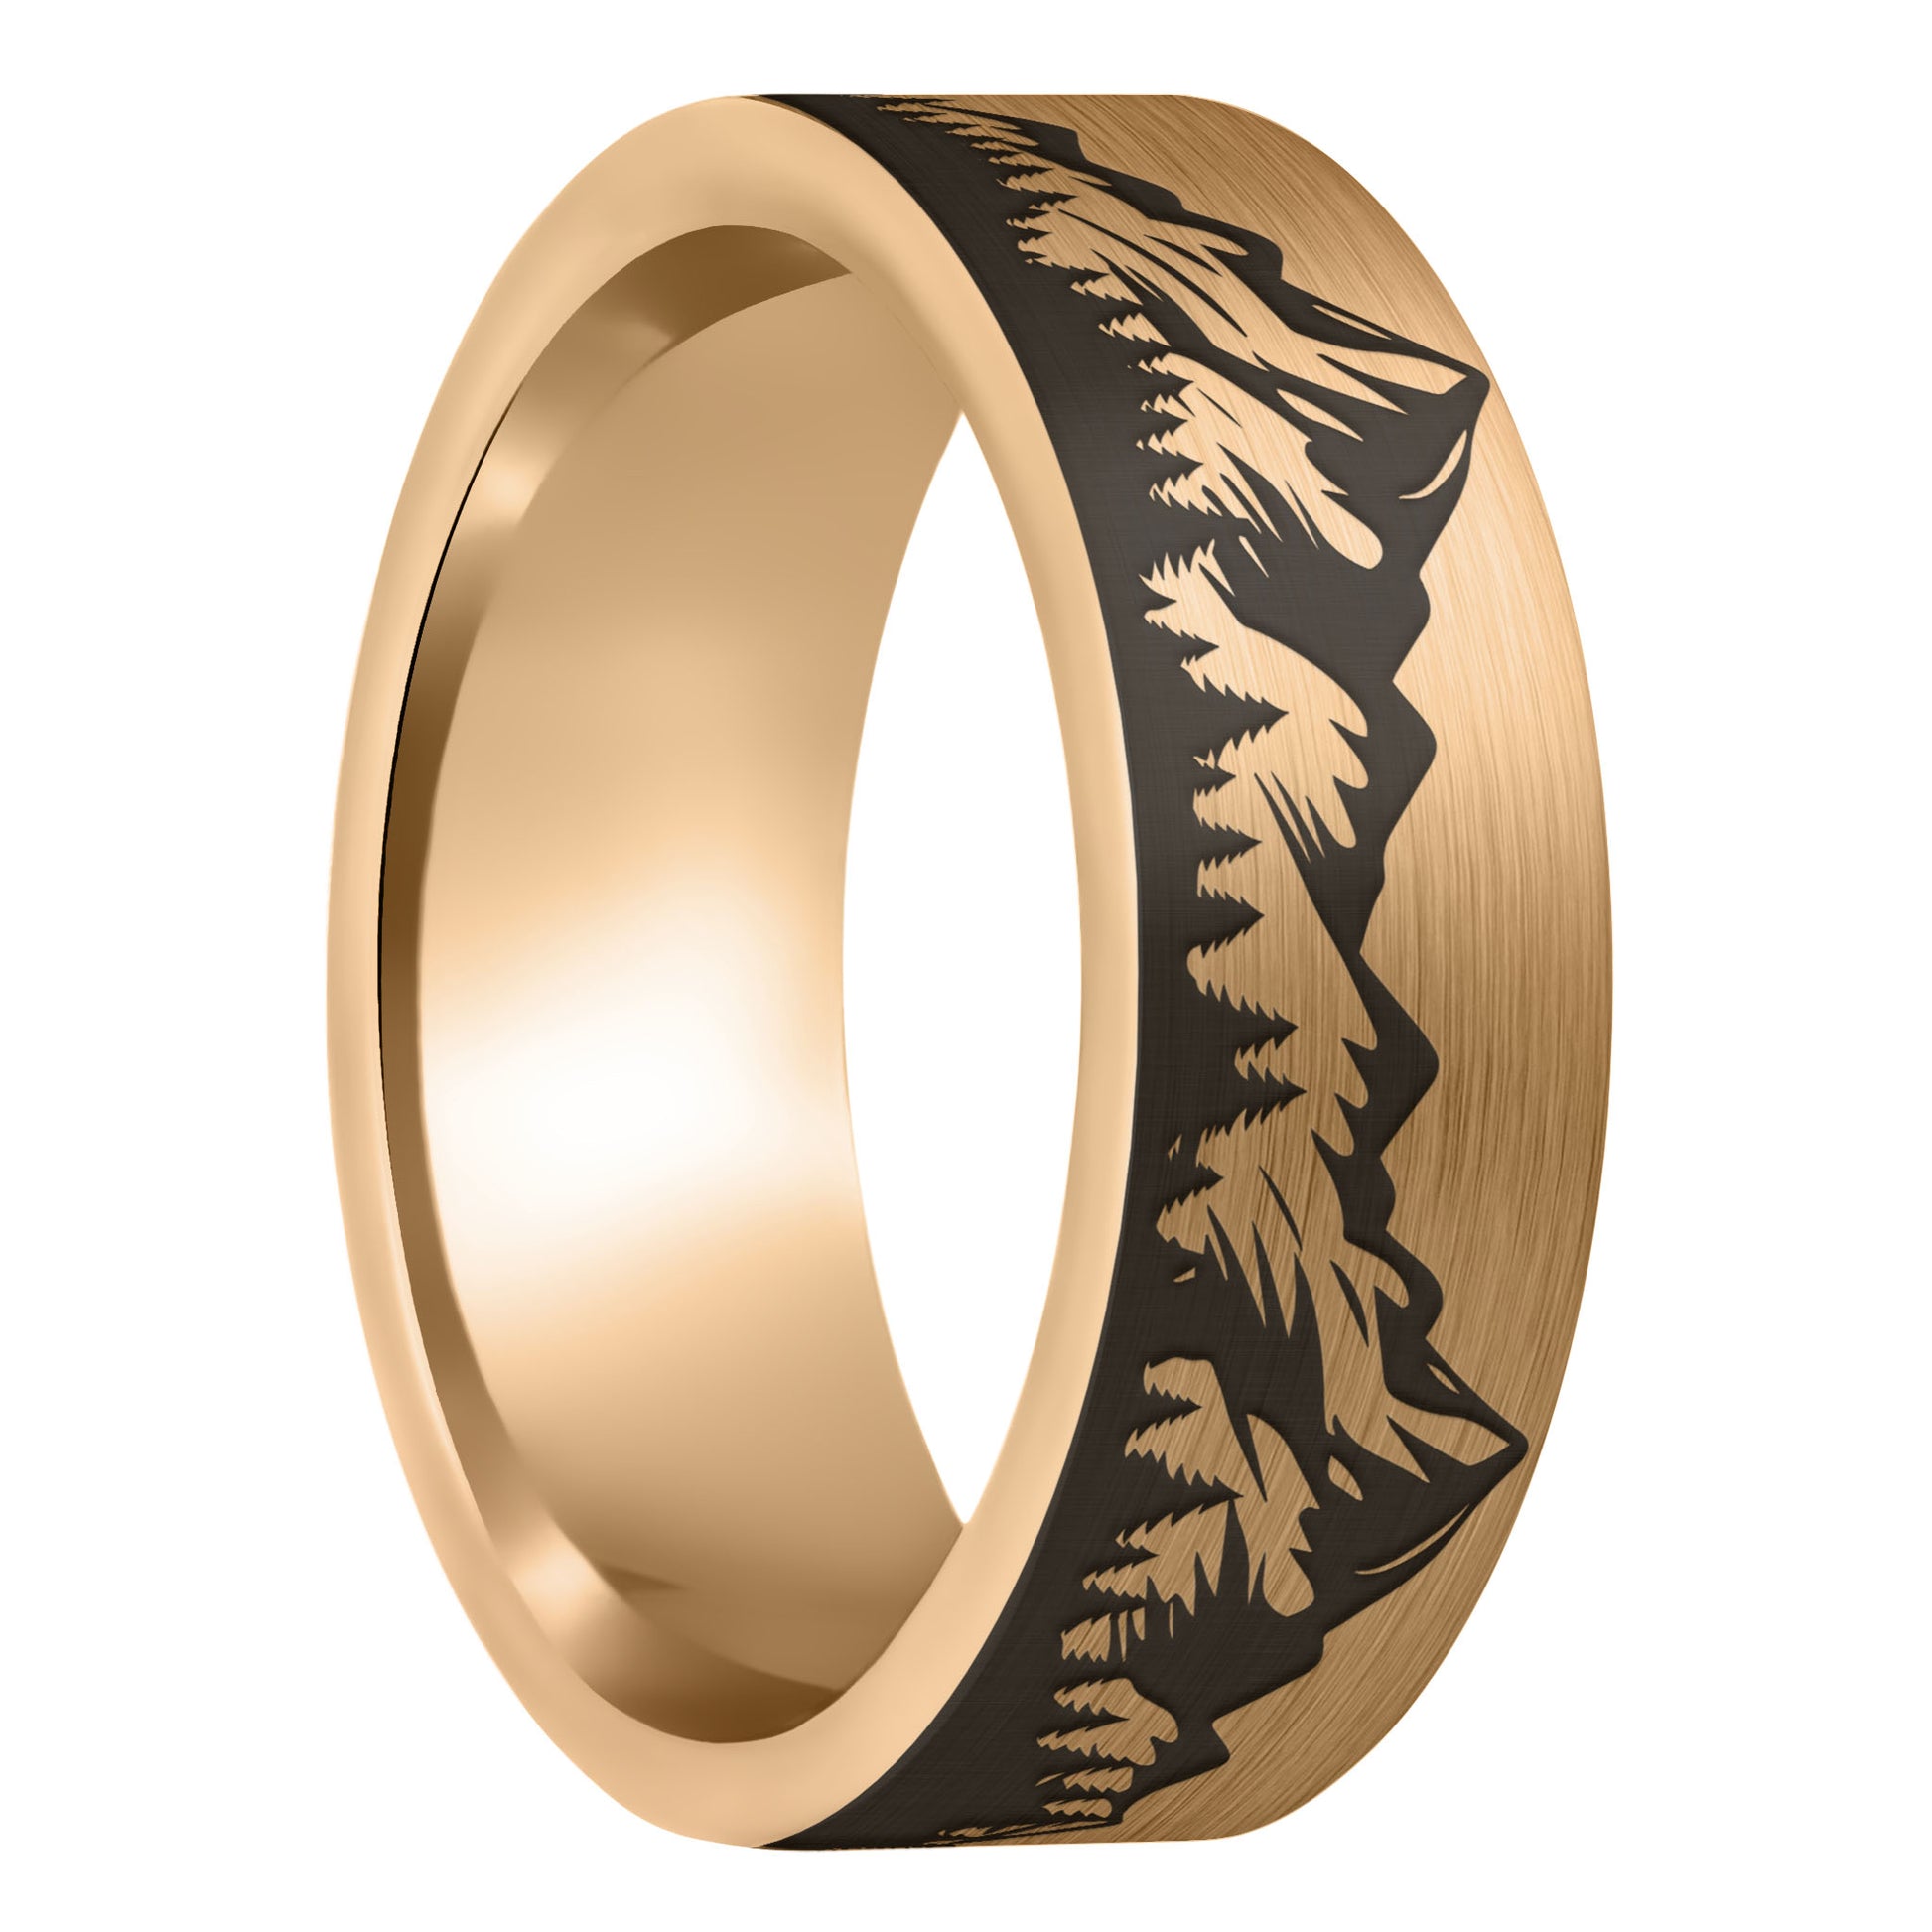 A mountain range forest brushed rose gold tungsten men's wedding band displayed on a plain white background.